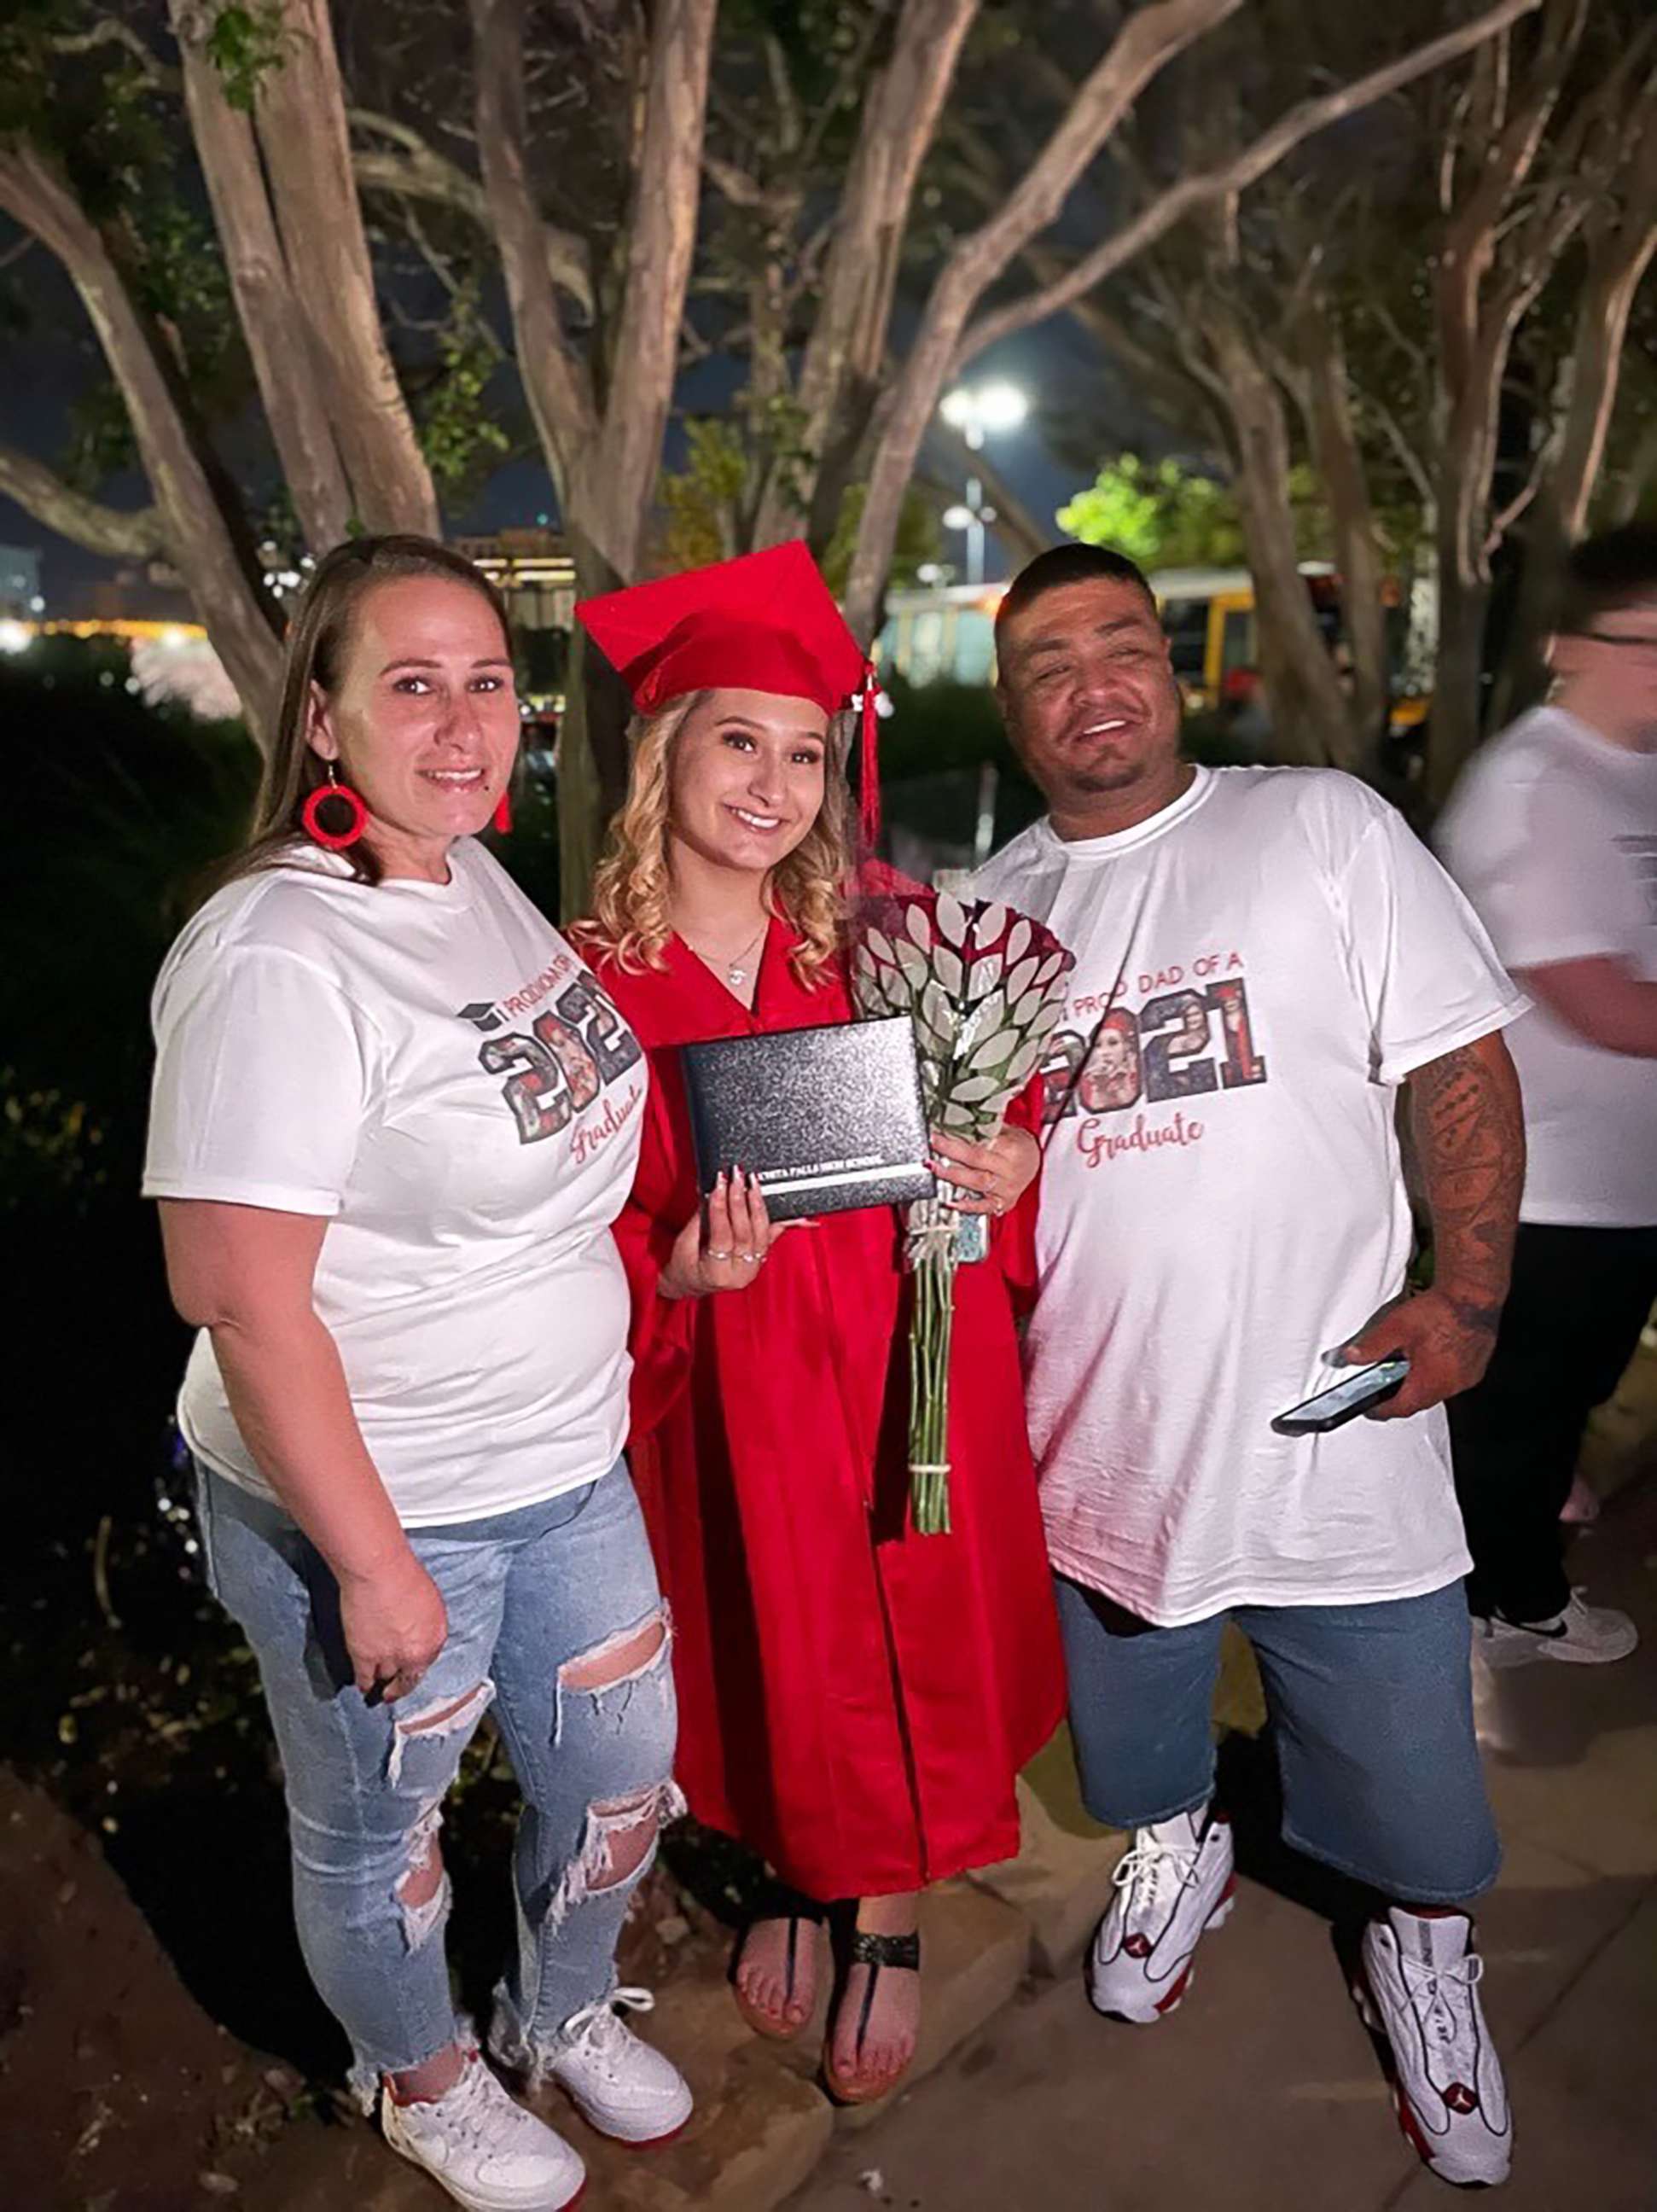 PHOTO: Alize Martinez was 19 years old when she died earlier this month. Here, she is pictured with her parents at her high school graduation.